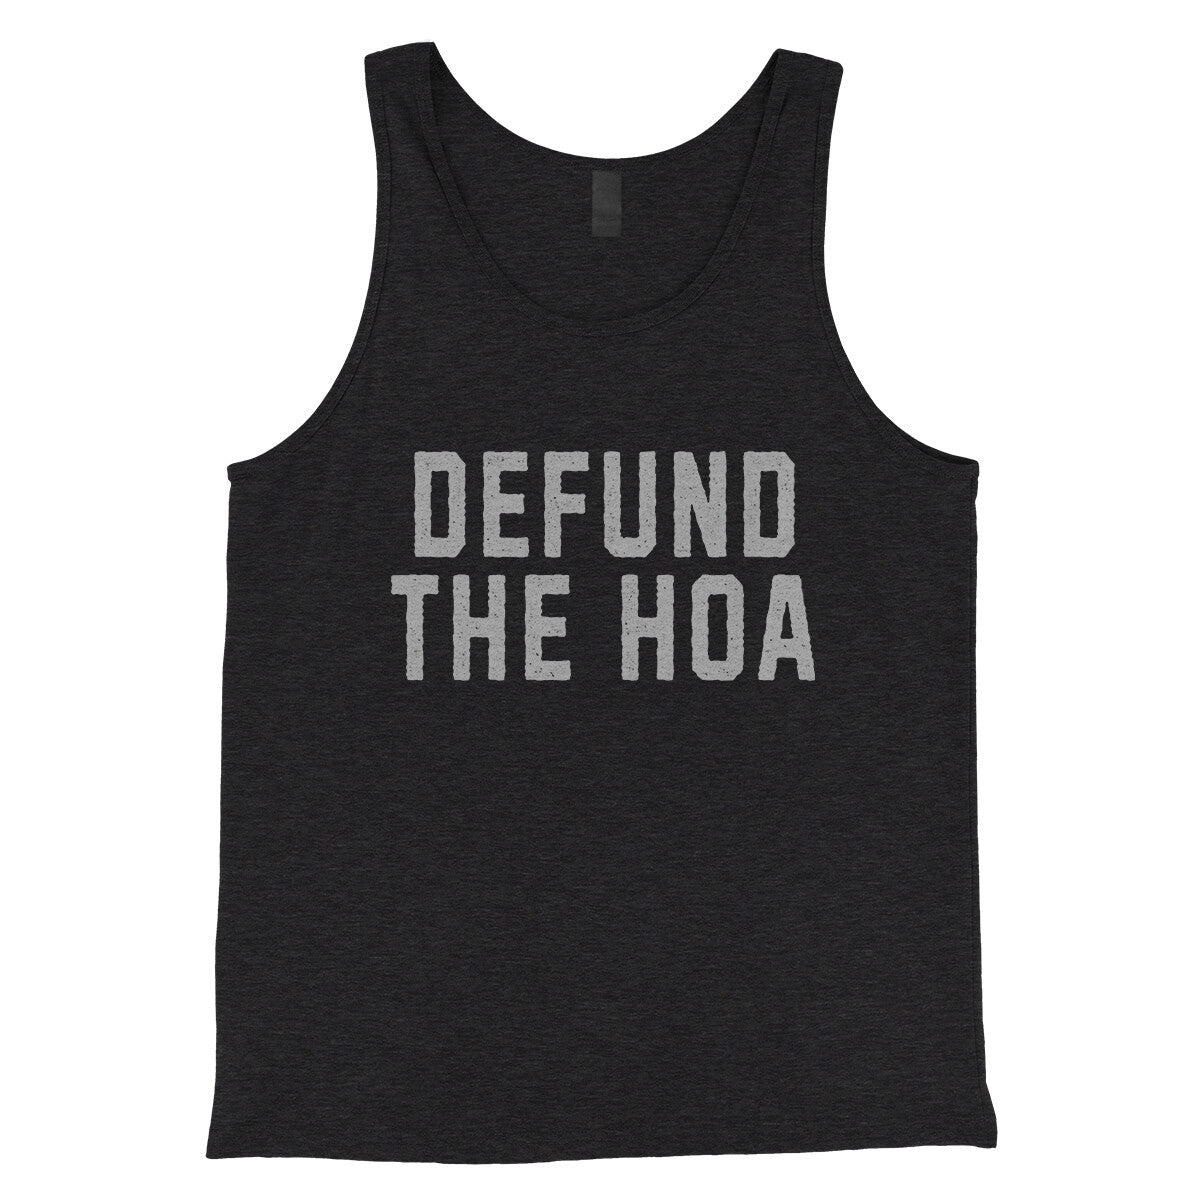 Defund the HOA in Charcoal Black TriBlend Color